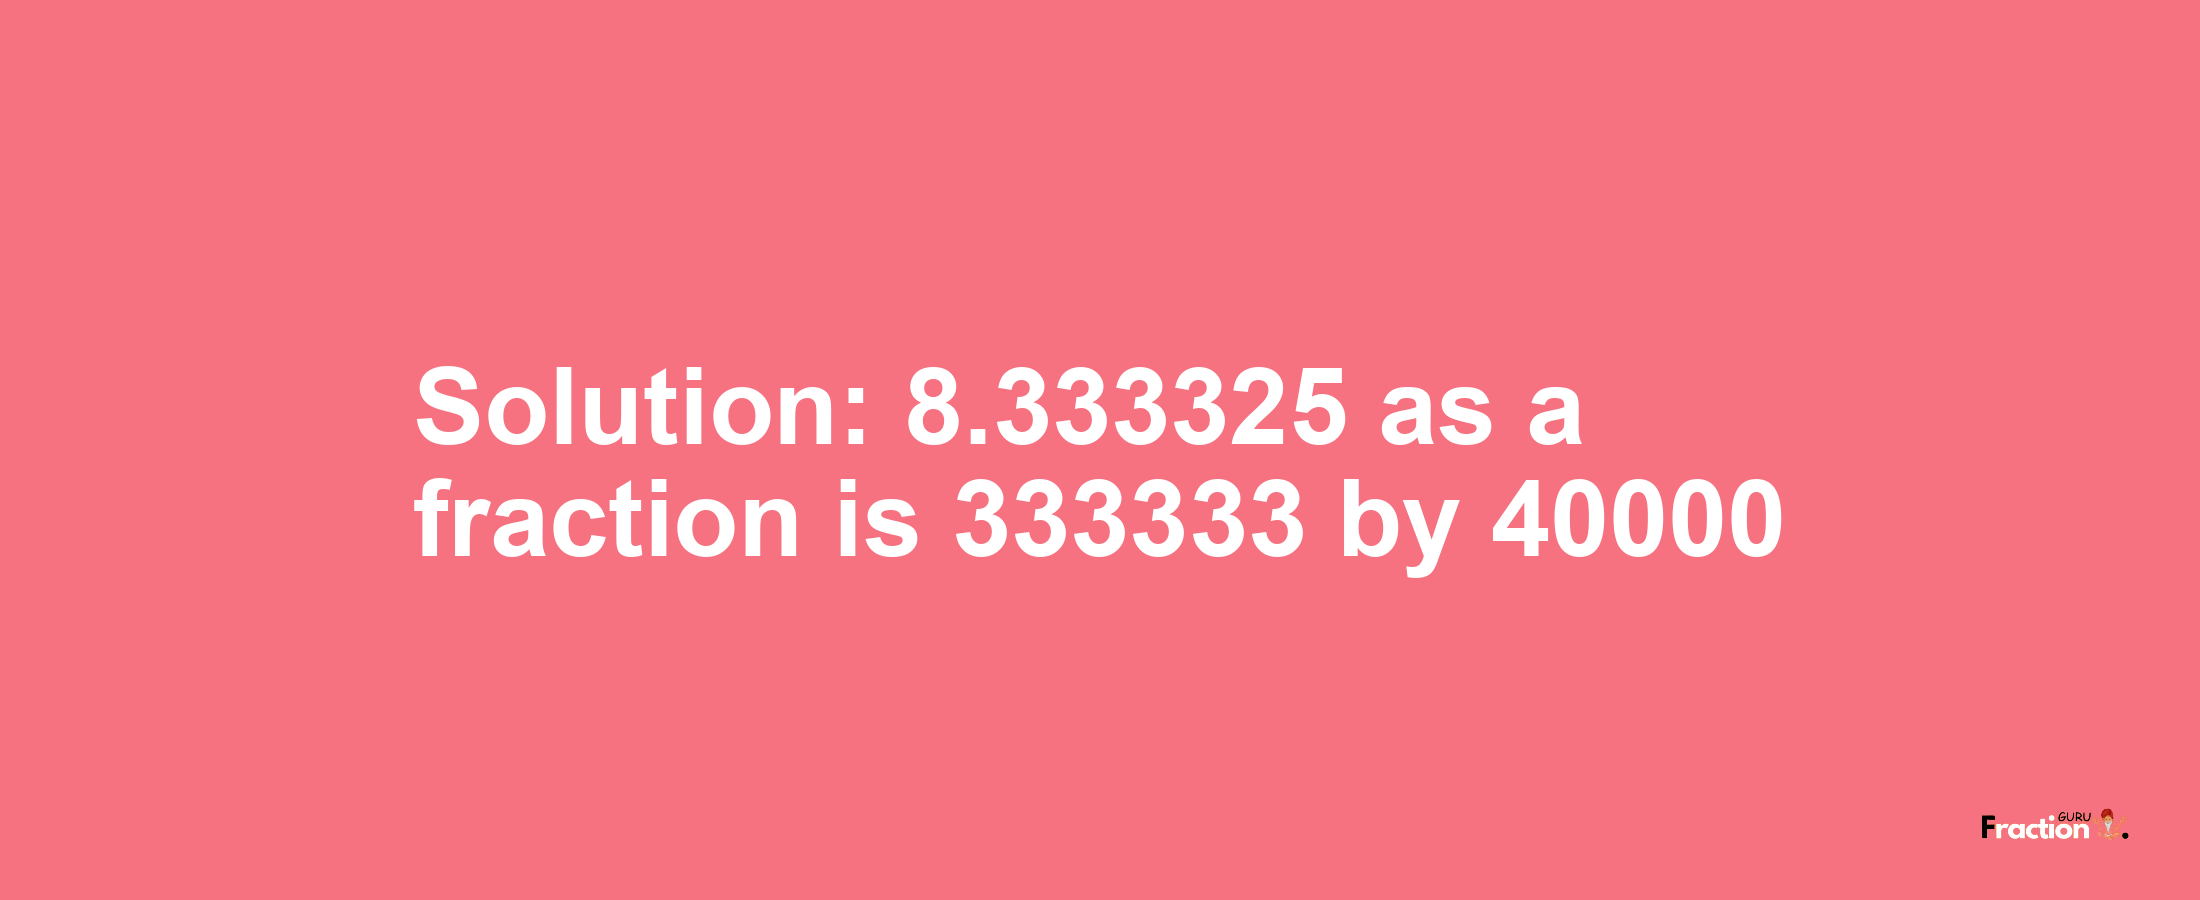 Solution:8.333325 as a fraction is 333333/40000